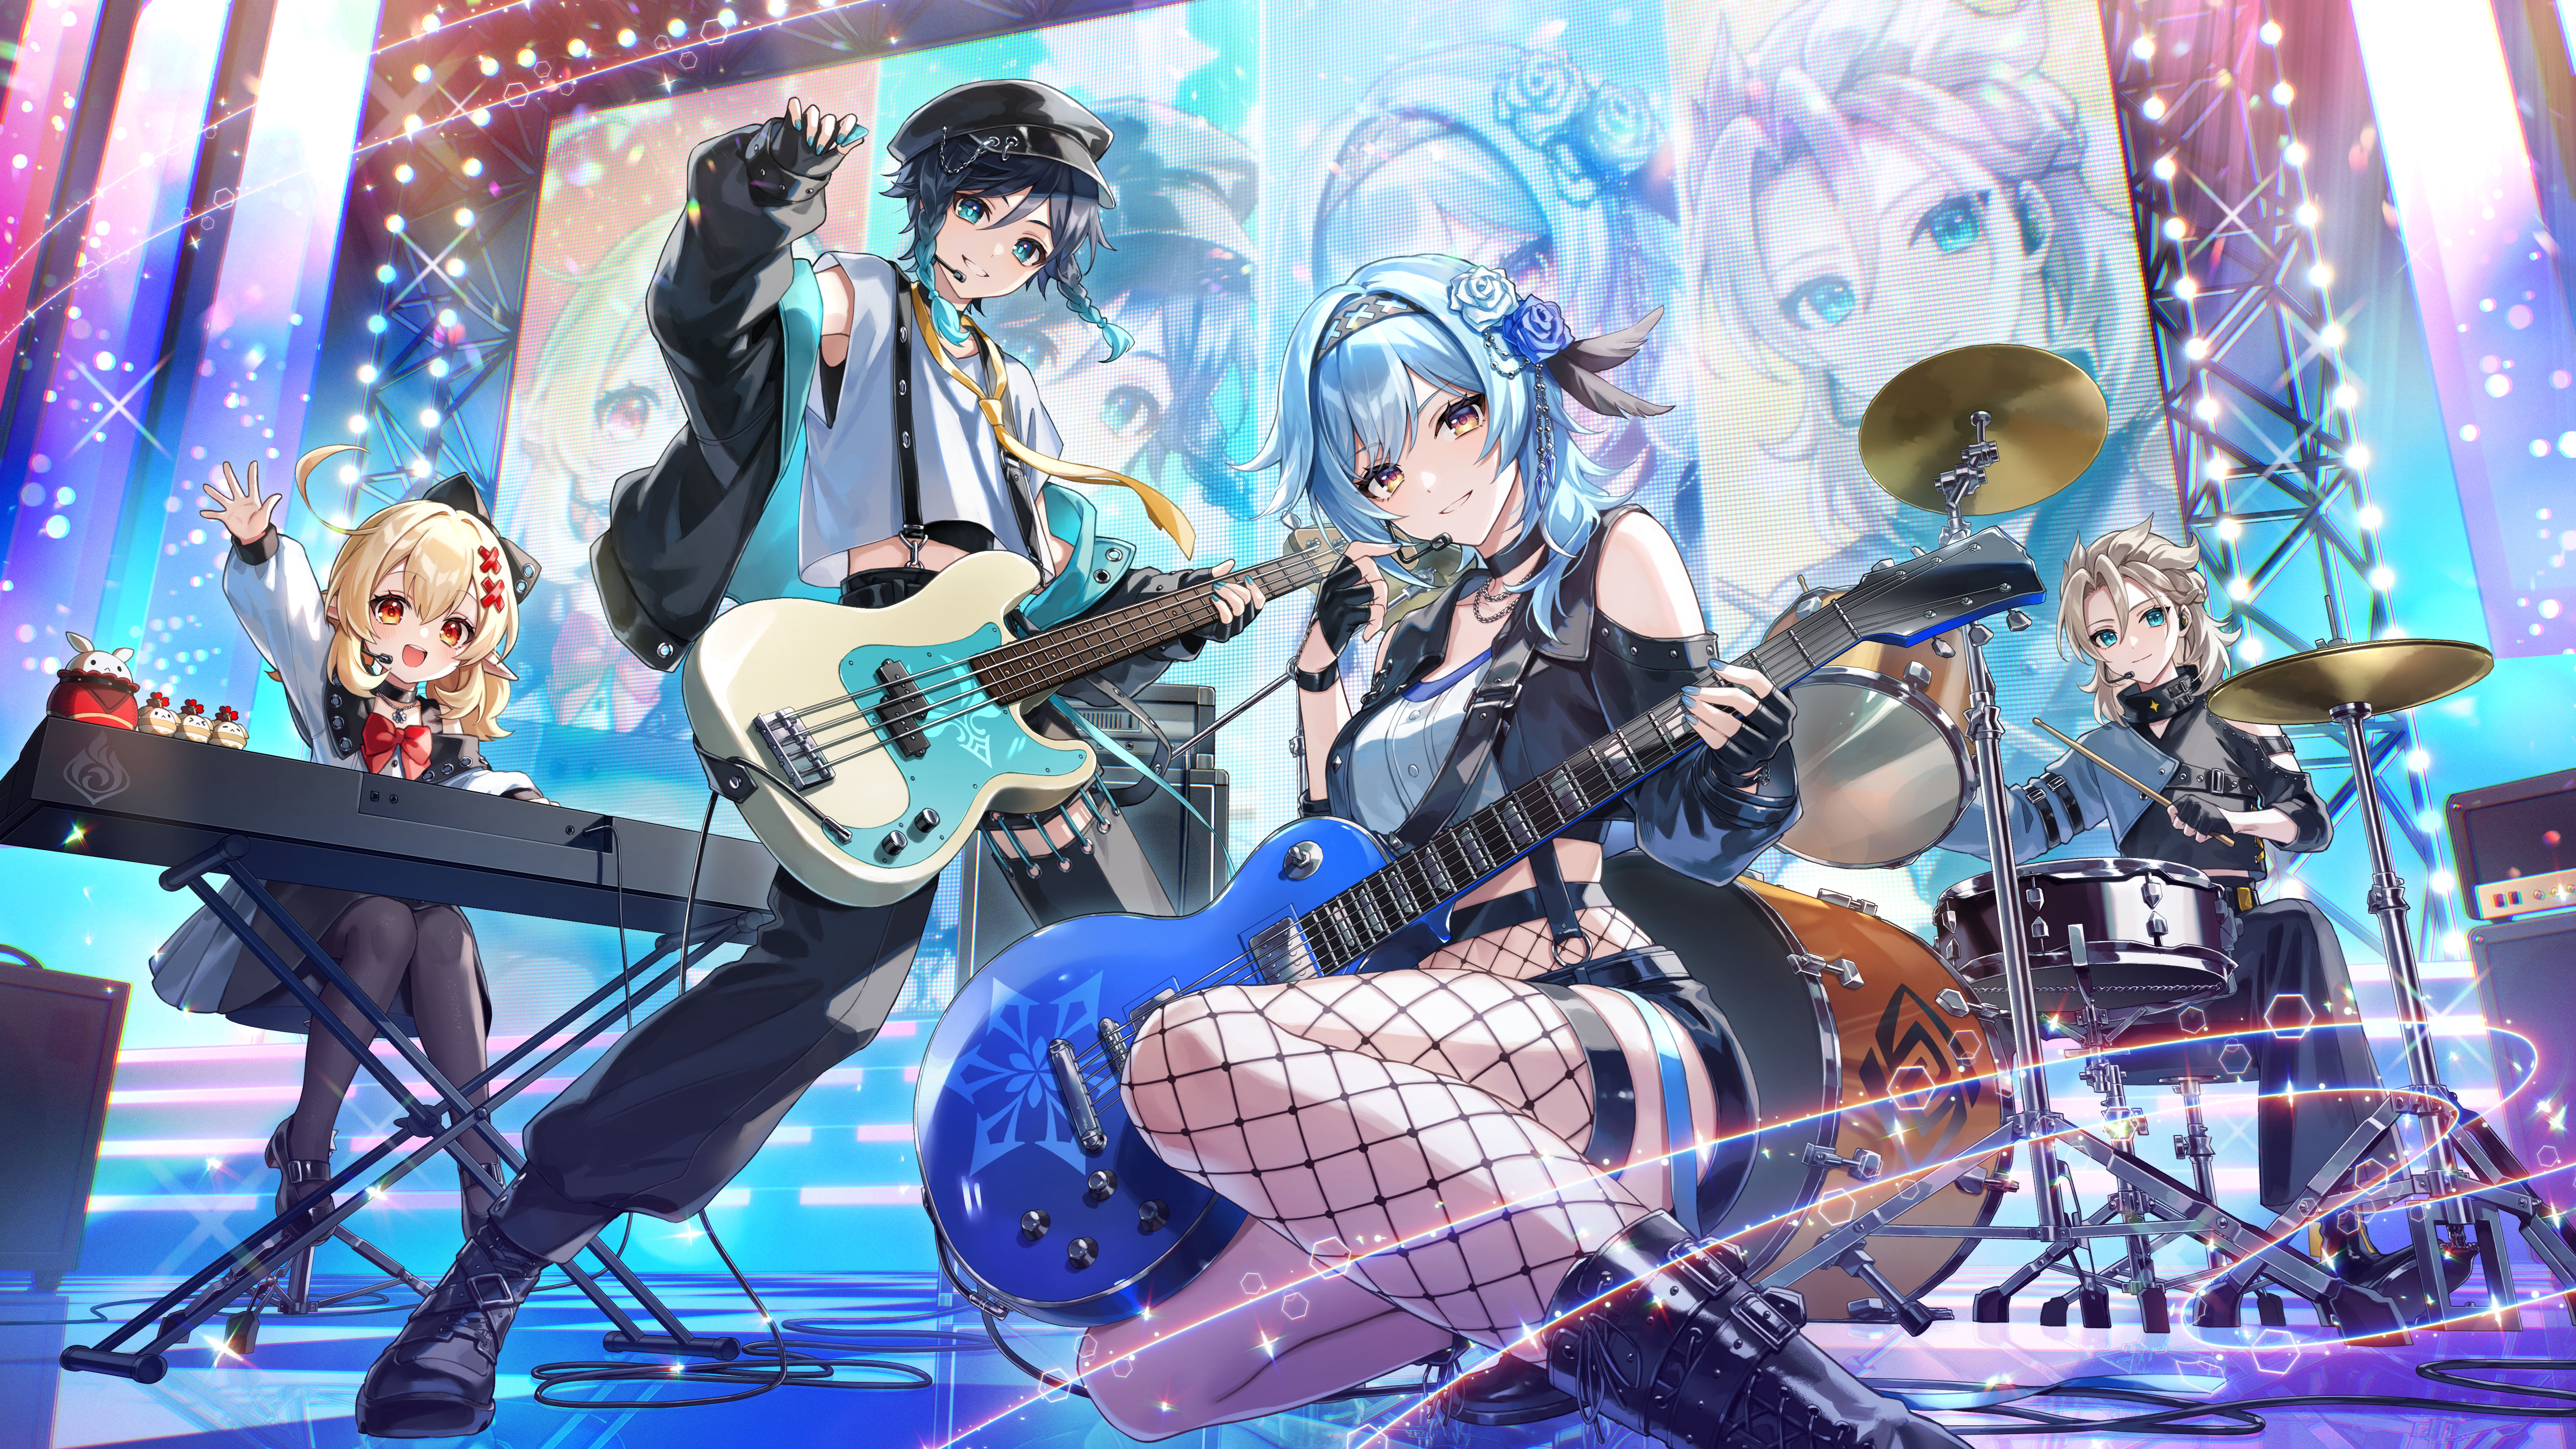 Anime 5760x3240 Genshin Impact artwork Eula (Genshin Impact) Venti (Genshin Impact) Klee (Genshin Impact) Albedo (Genshin Impact) anime anime girls anime boys band music guitar stages drum and bass electric guitar